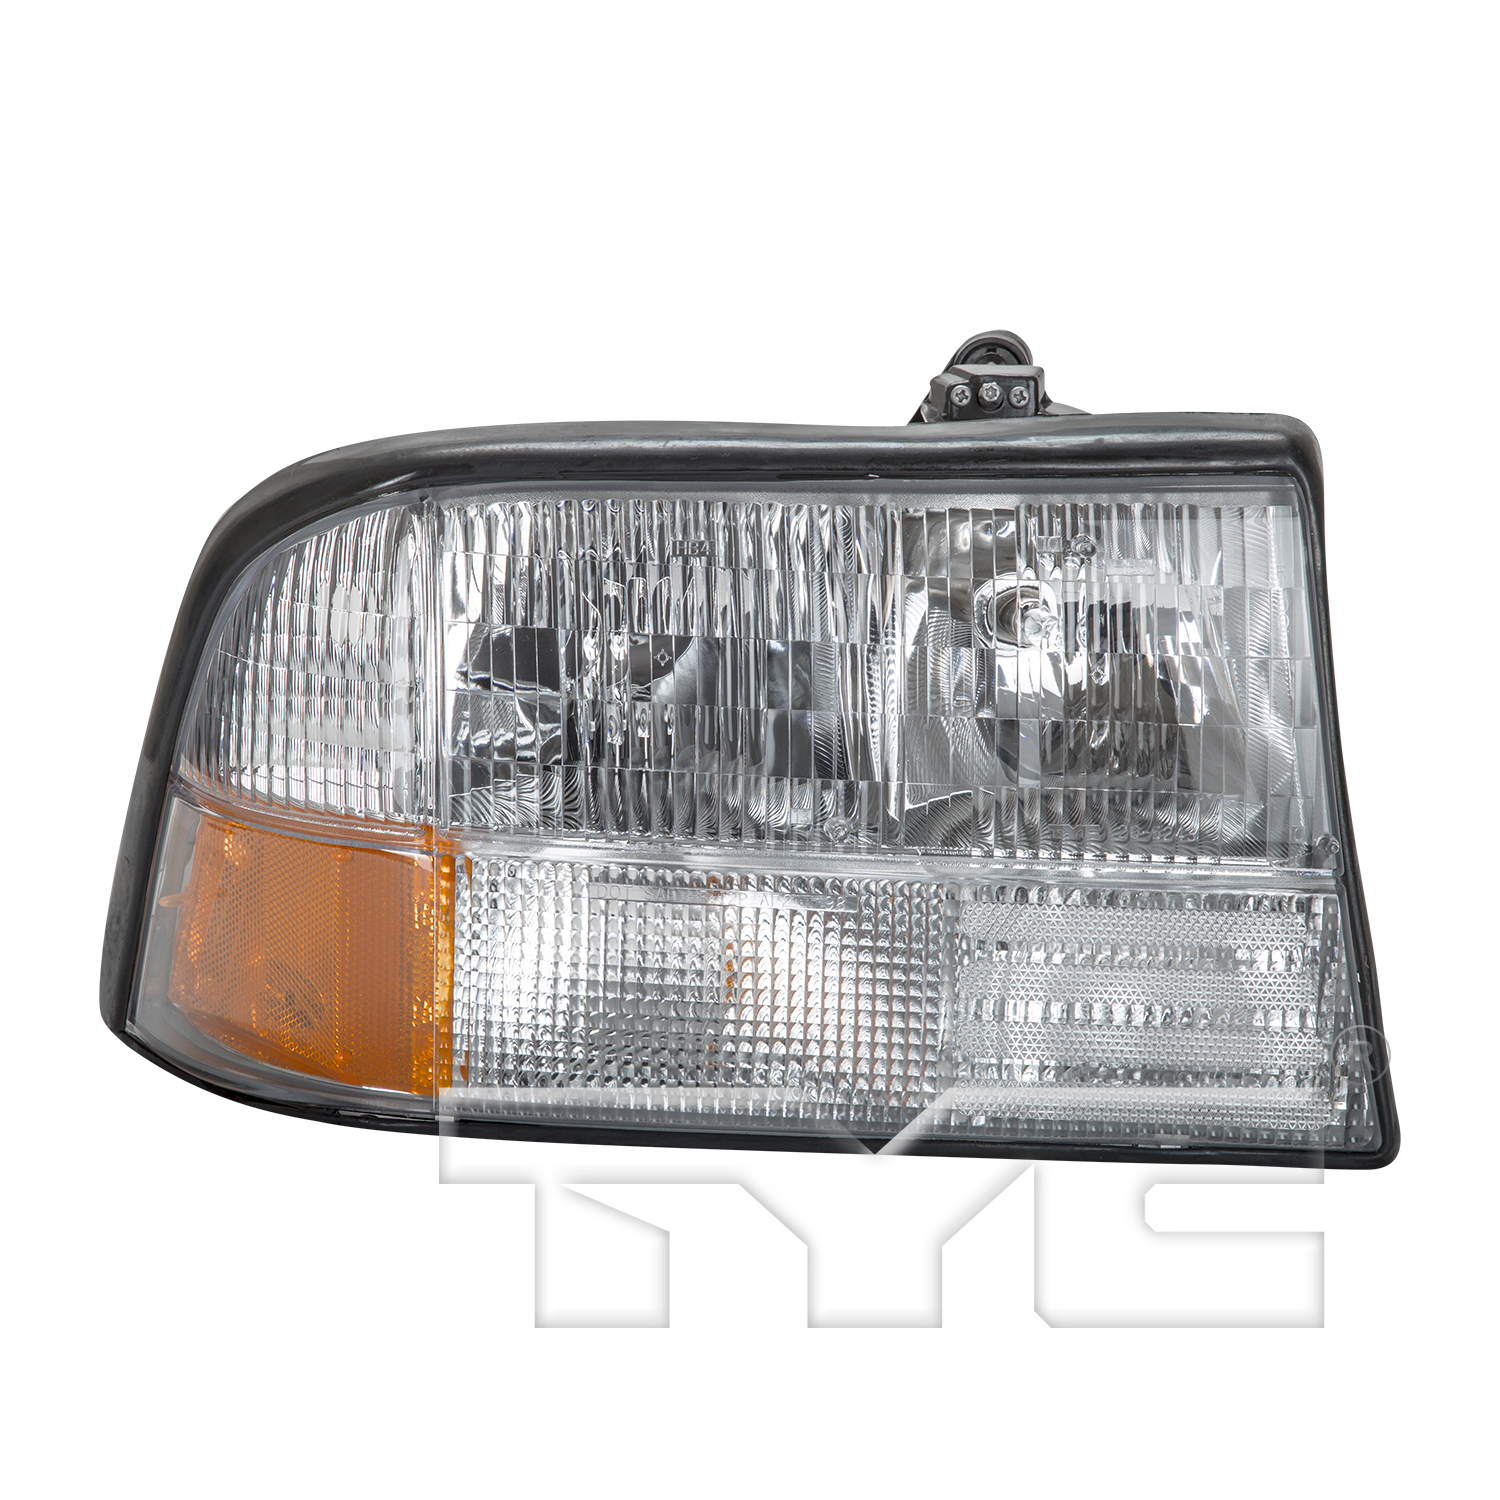 Aftermarket HEADLIGHTS for GMC - JIMMY, JIMMY,98-00,RT Headlamp assy composite